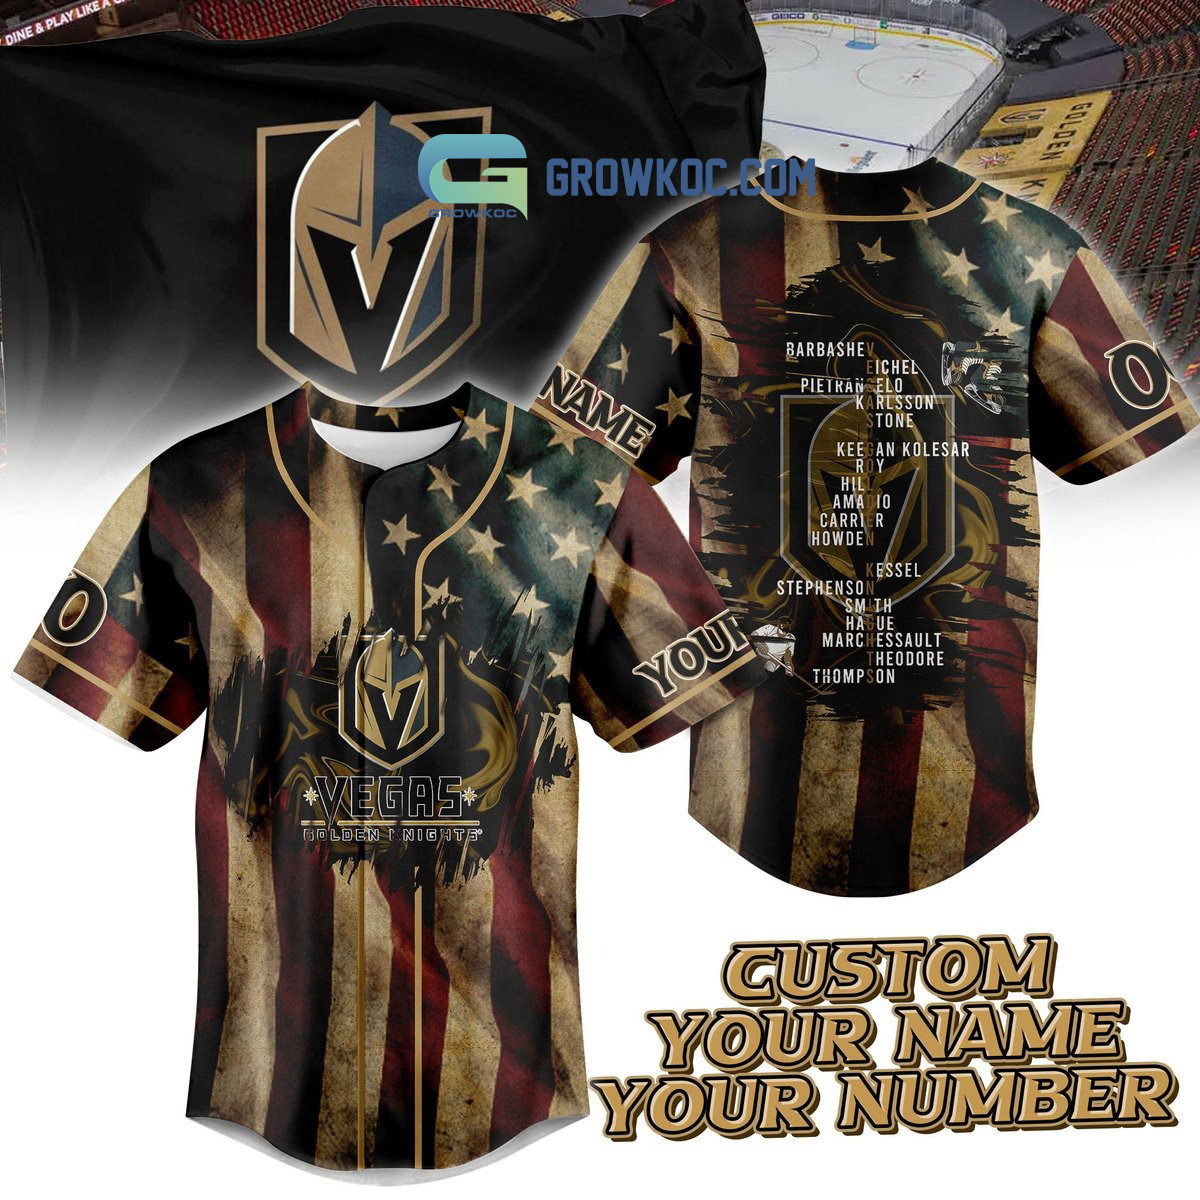 Top 4 Reasons to Shop at Vegas Golden Knights' 'Gold Friday